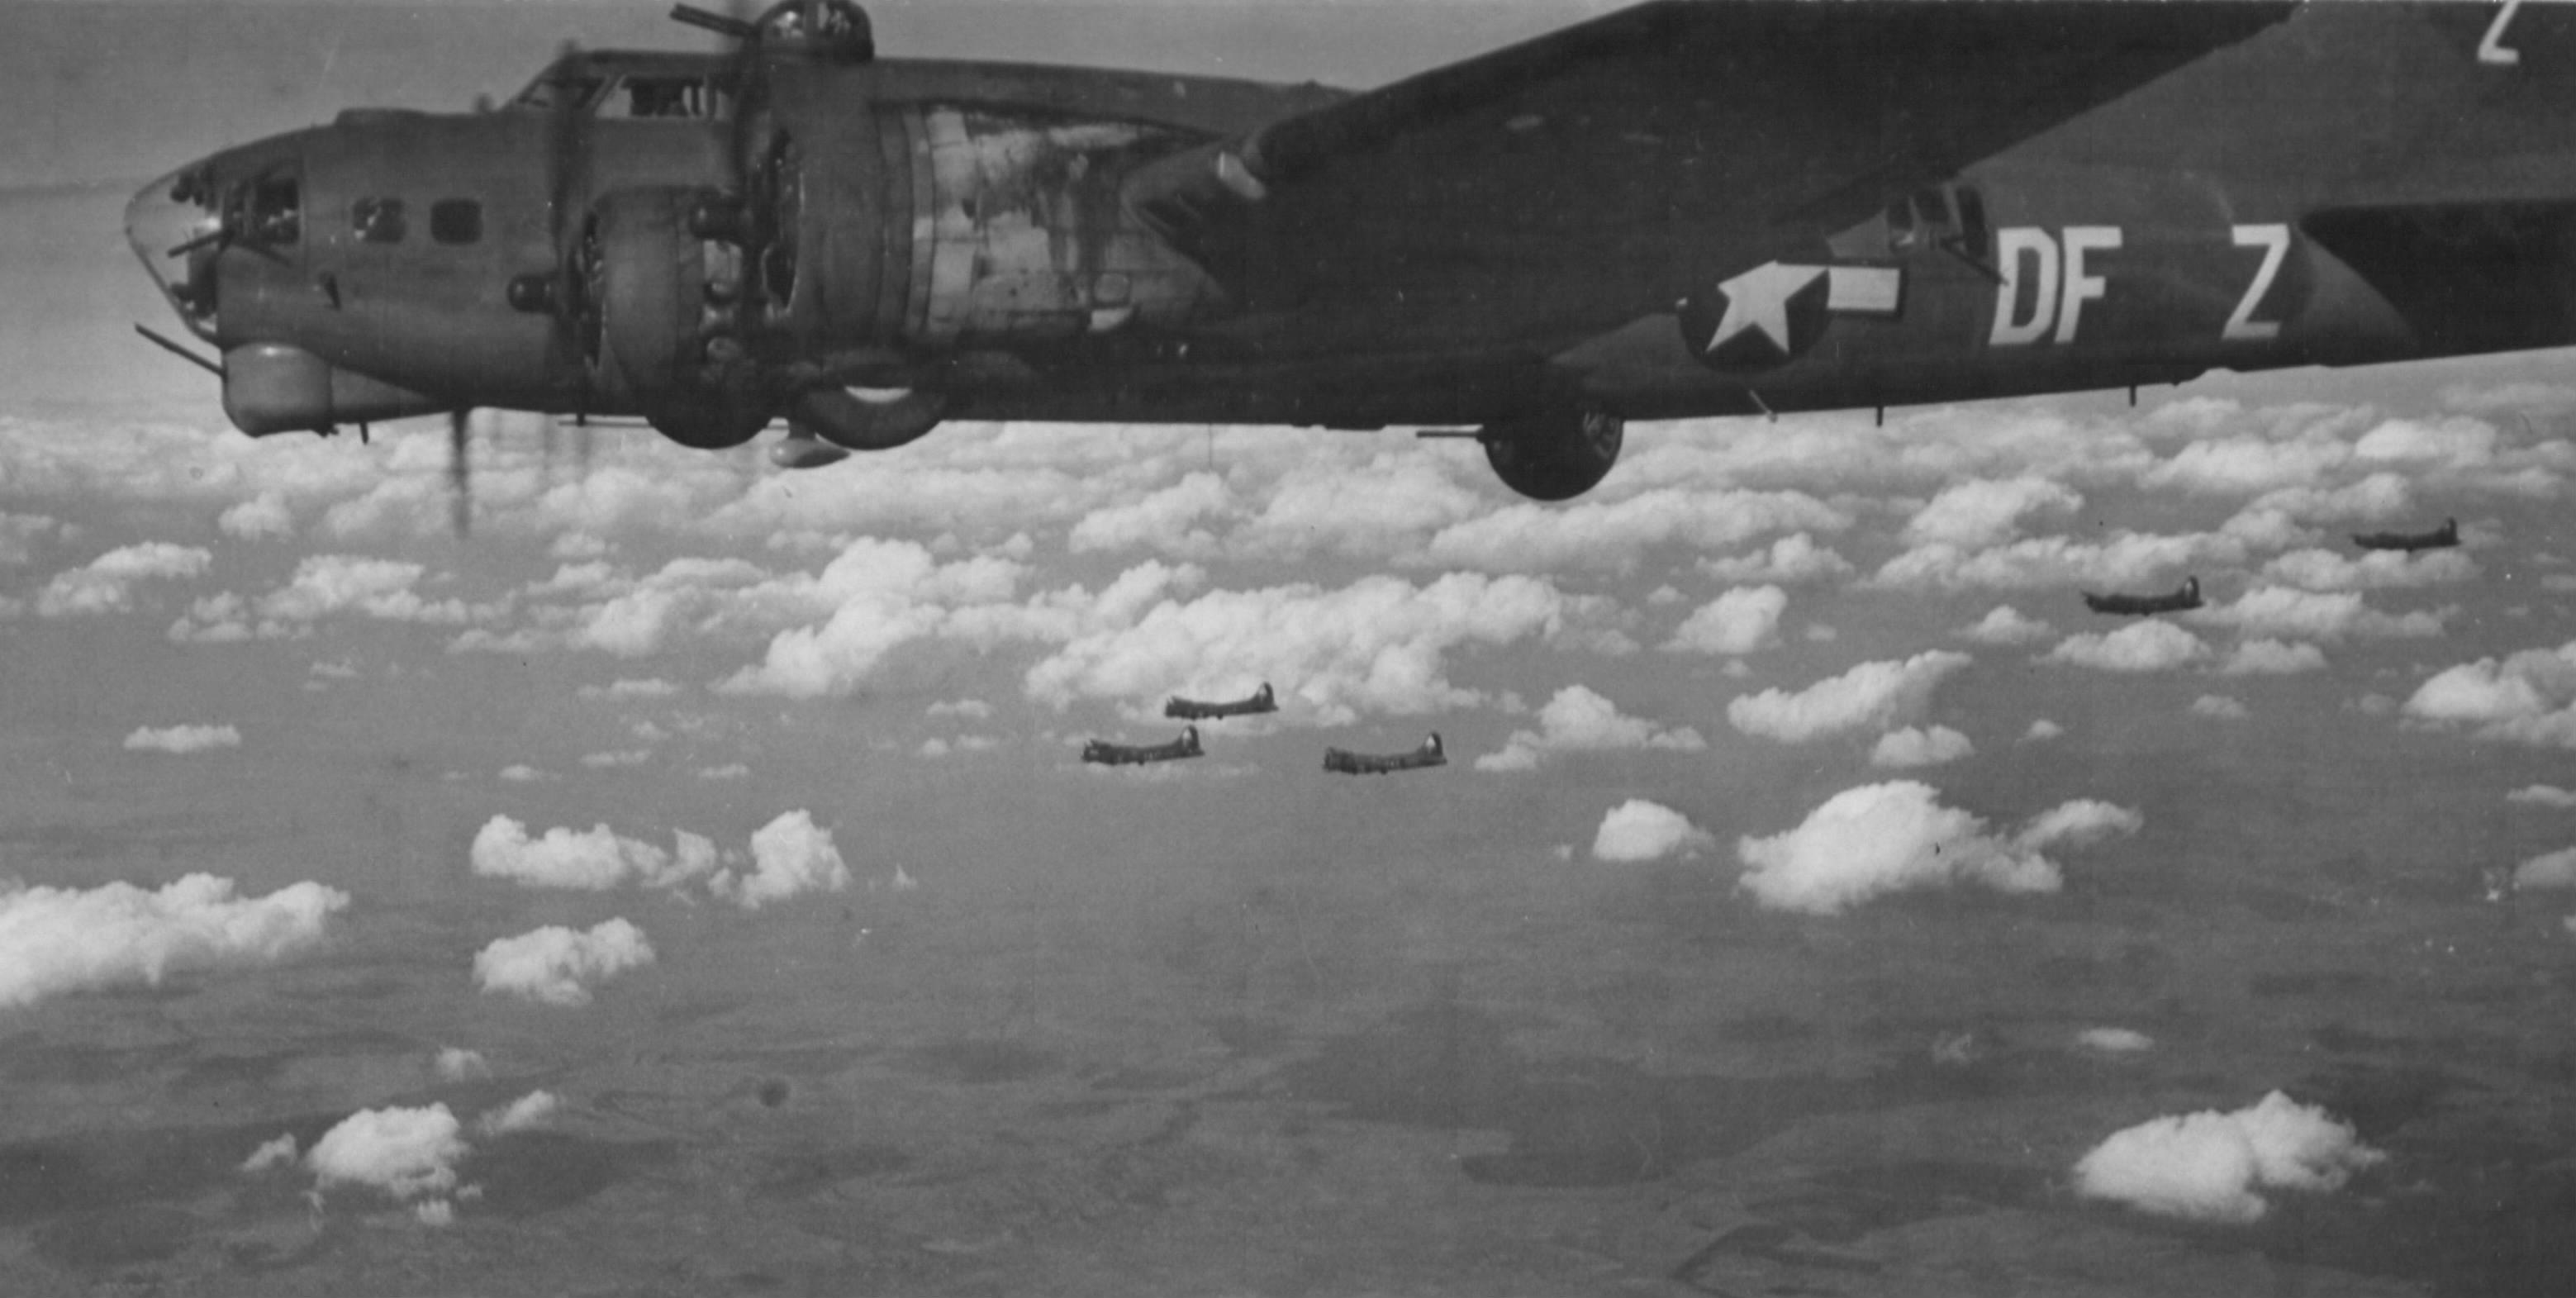 B 17 Flying Fortress Archives. WW2 Research Inc